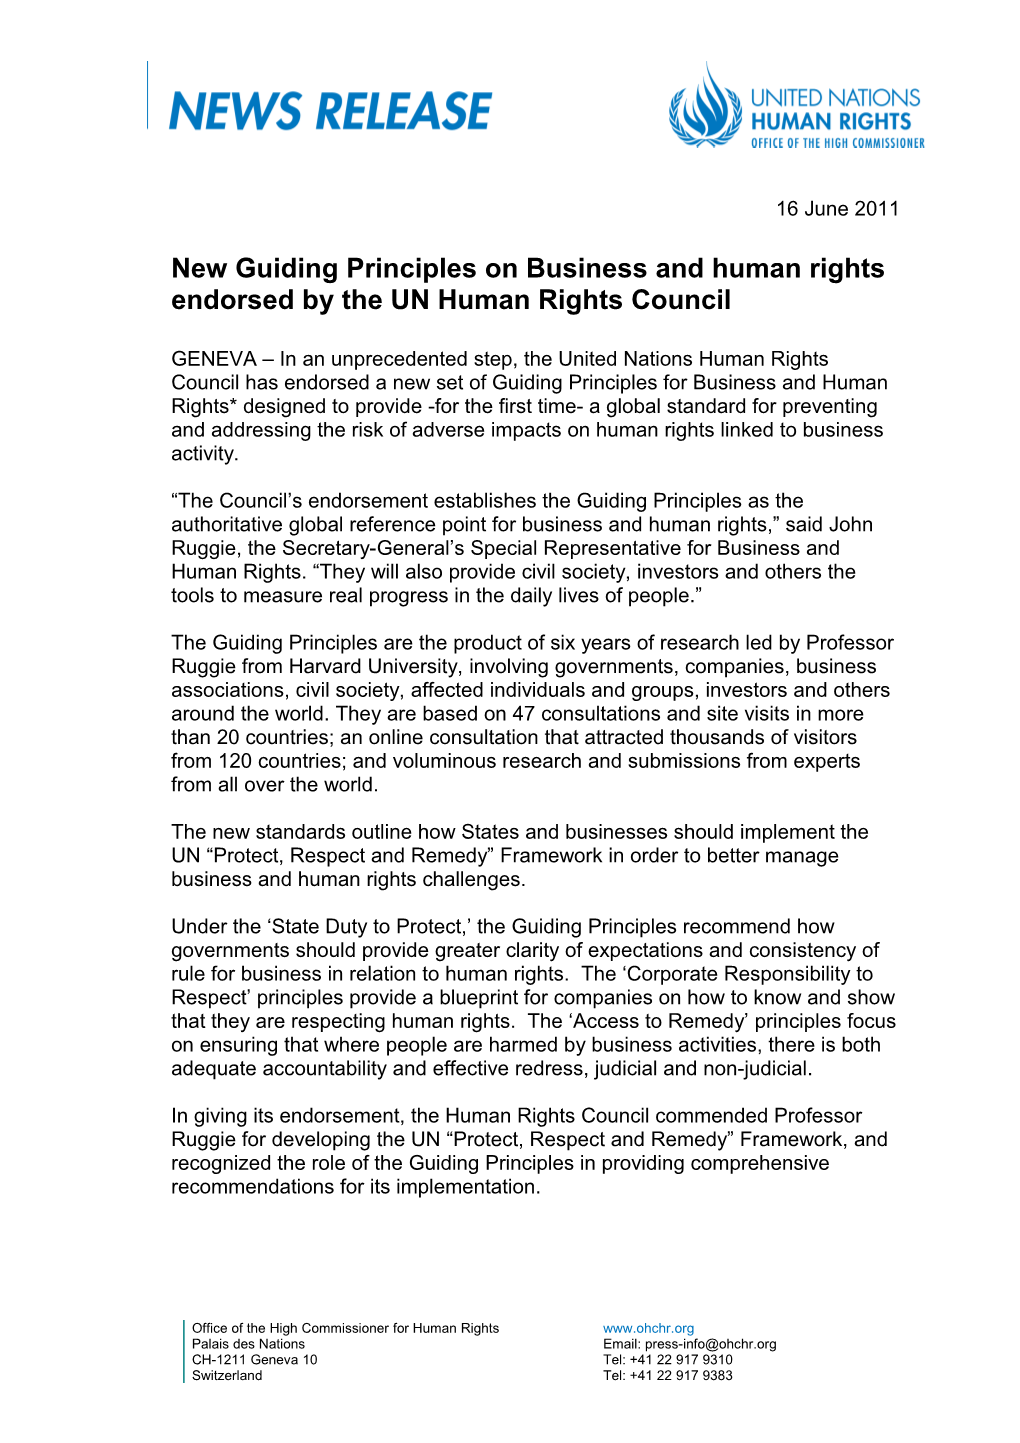 New Guiding Principles on Business and Human Rightsendorsed by the UN Human Rights Council